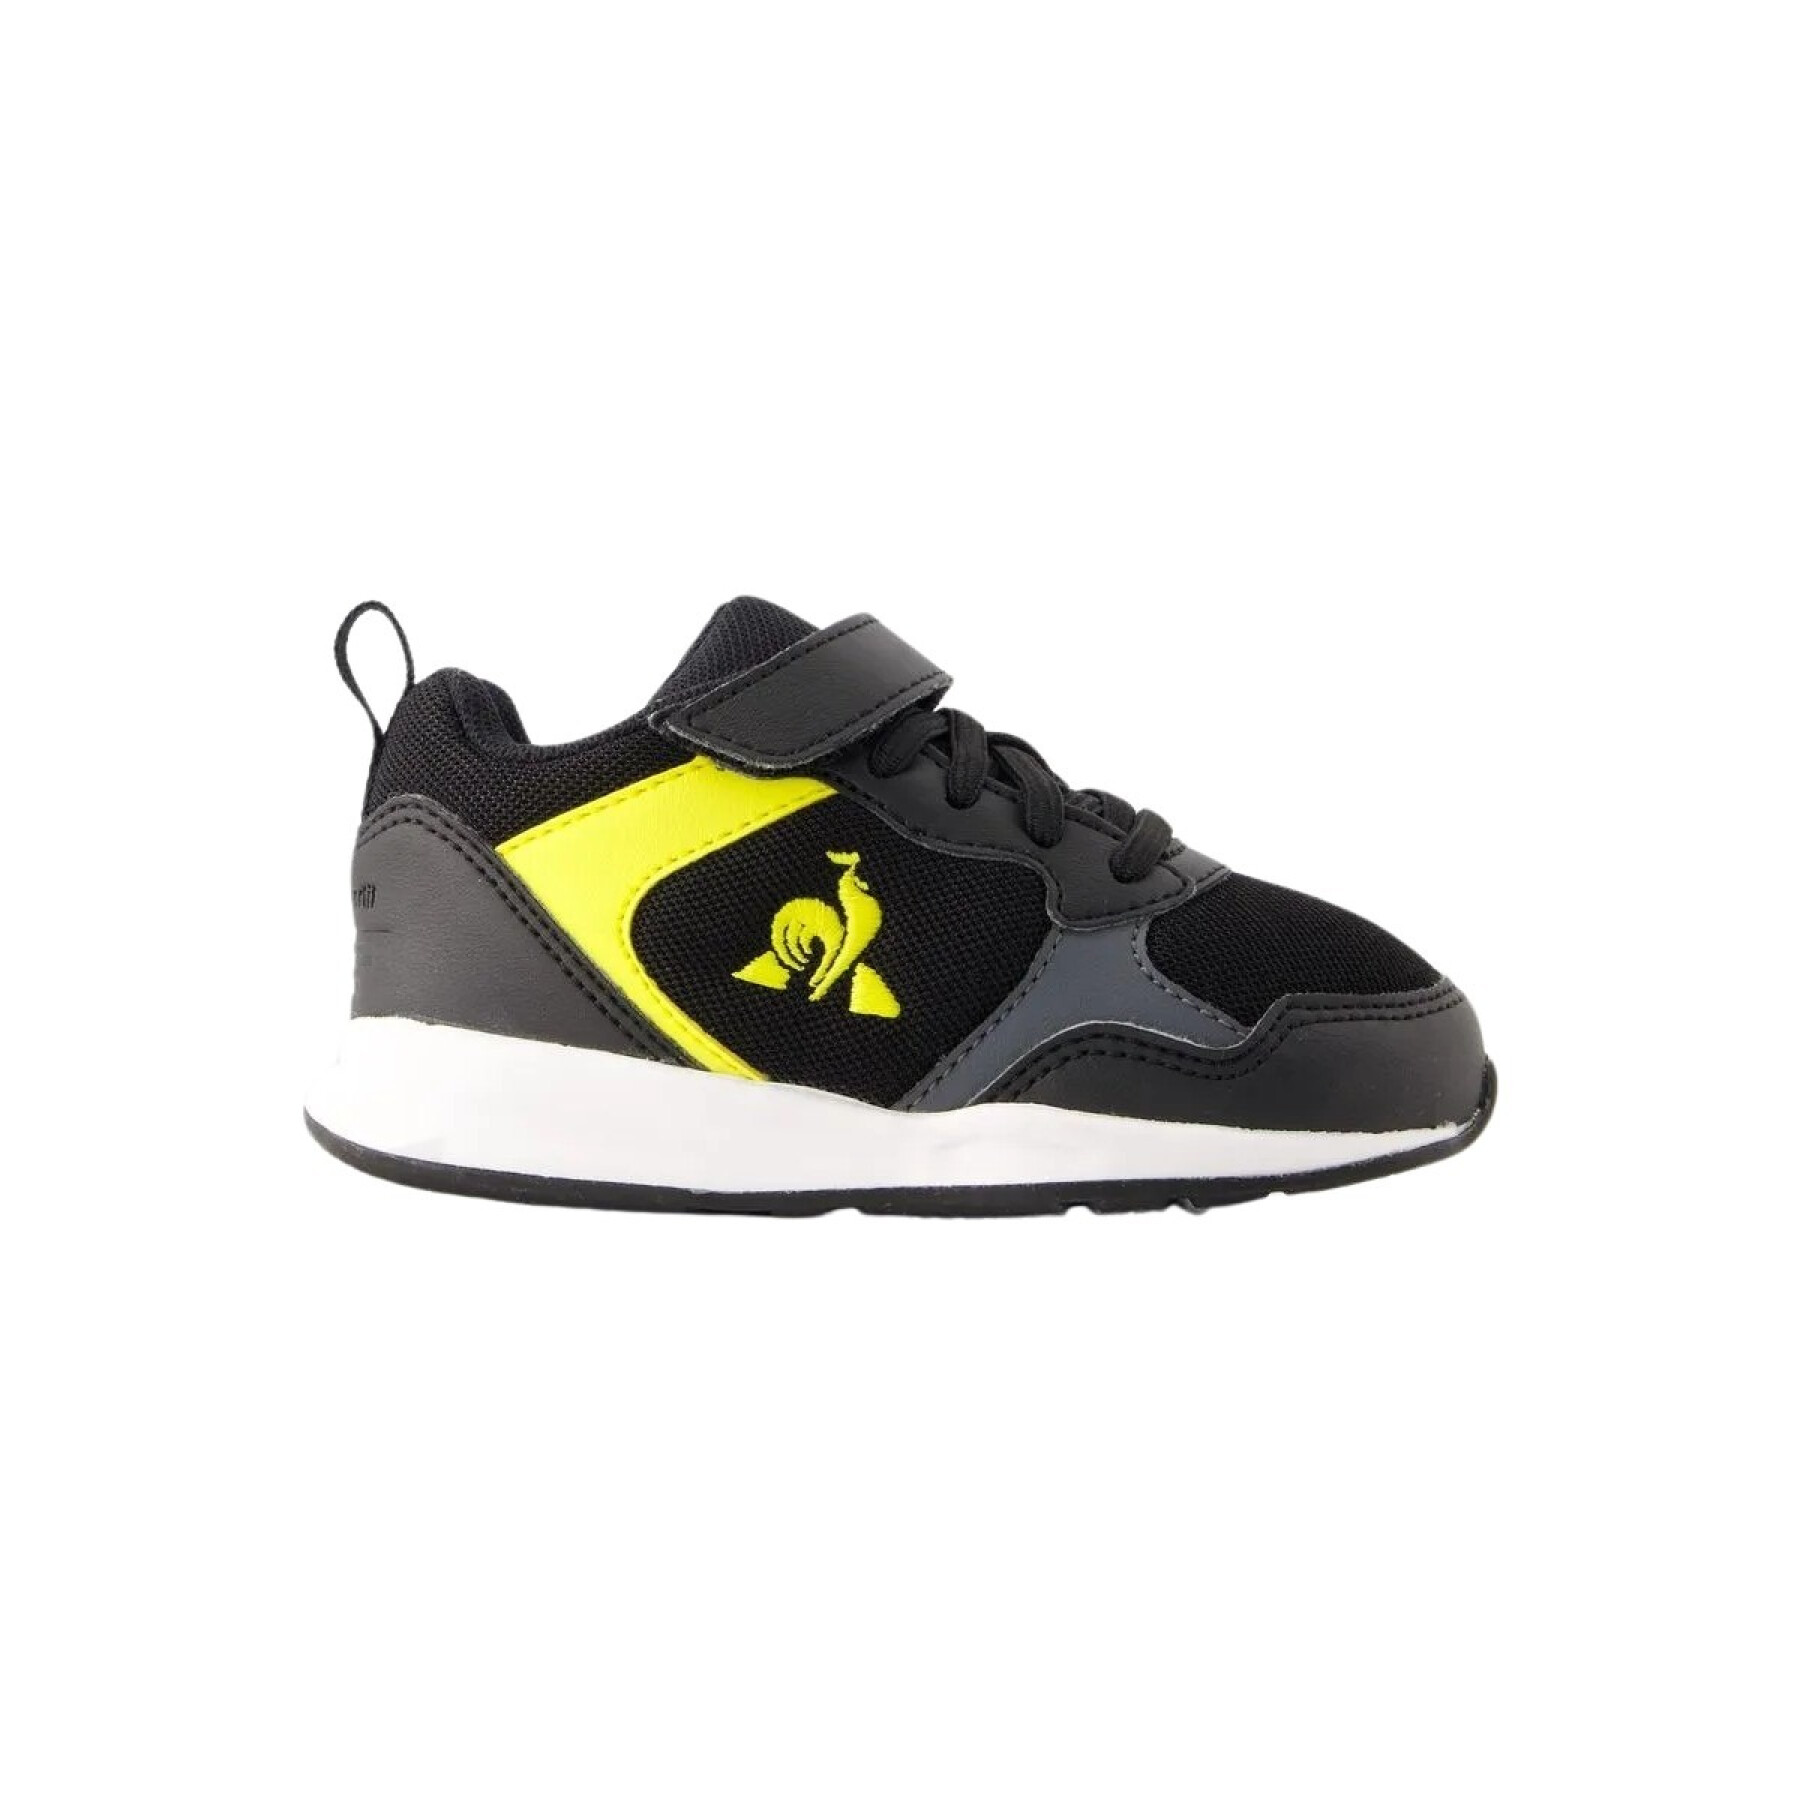 Baby sneakers Le Coq Sportif R500 INF